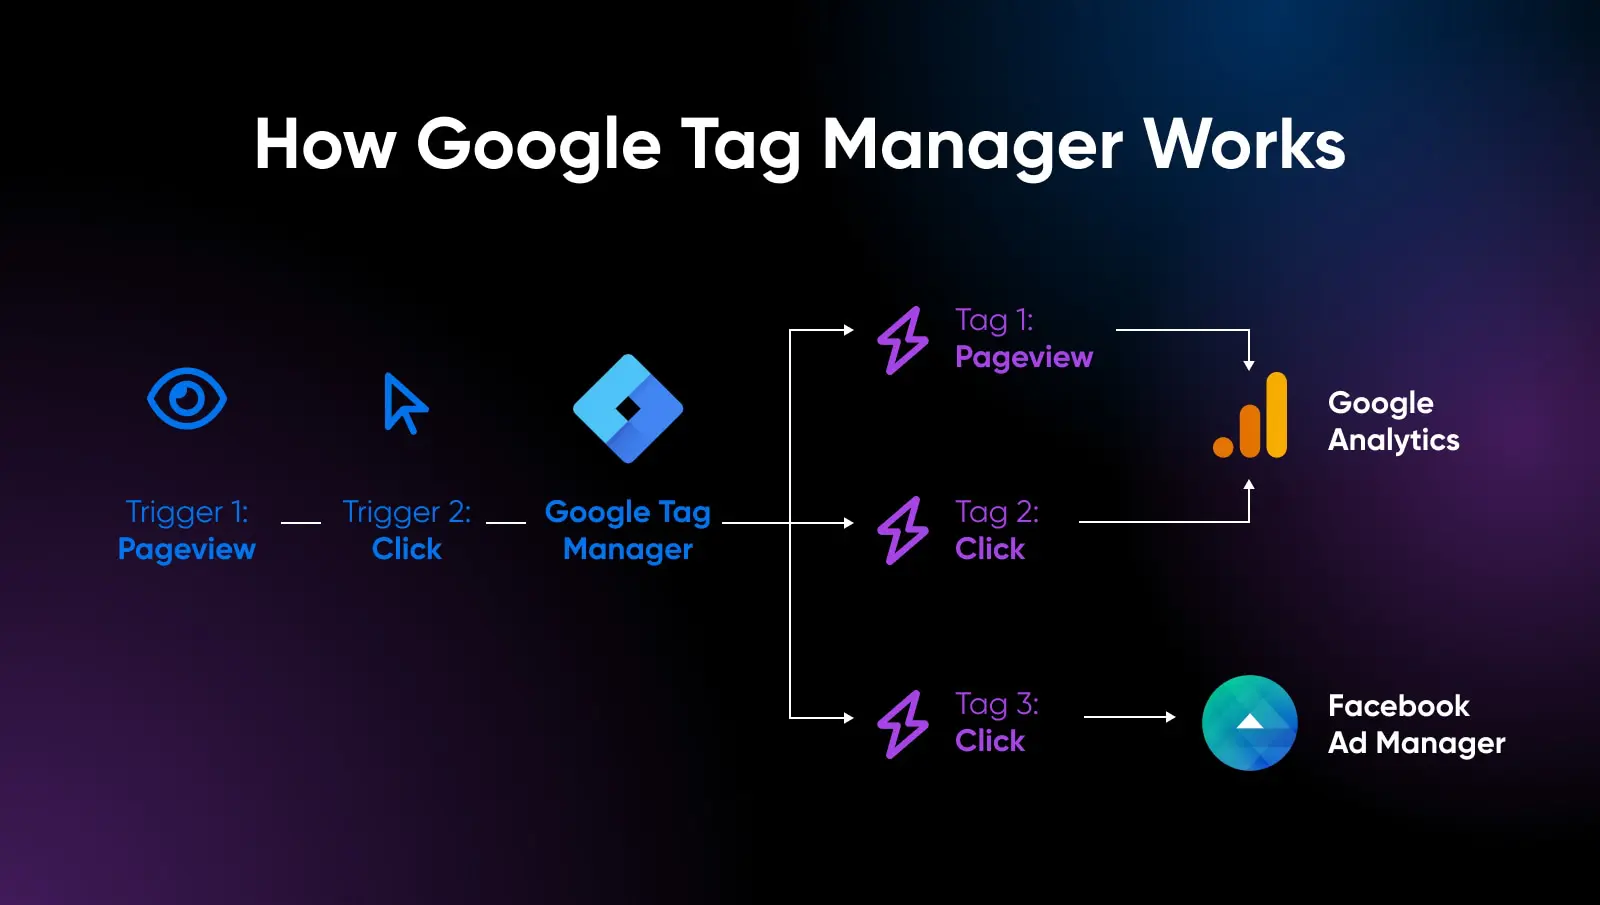 a diagram explaining how google tag manager works showing triggers that feed to the broad "google tag" which contains the individual tags